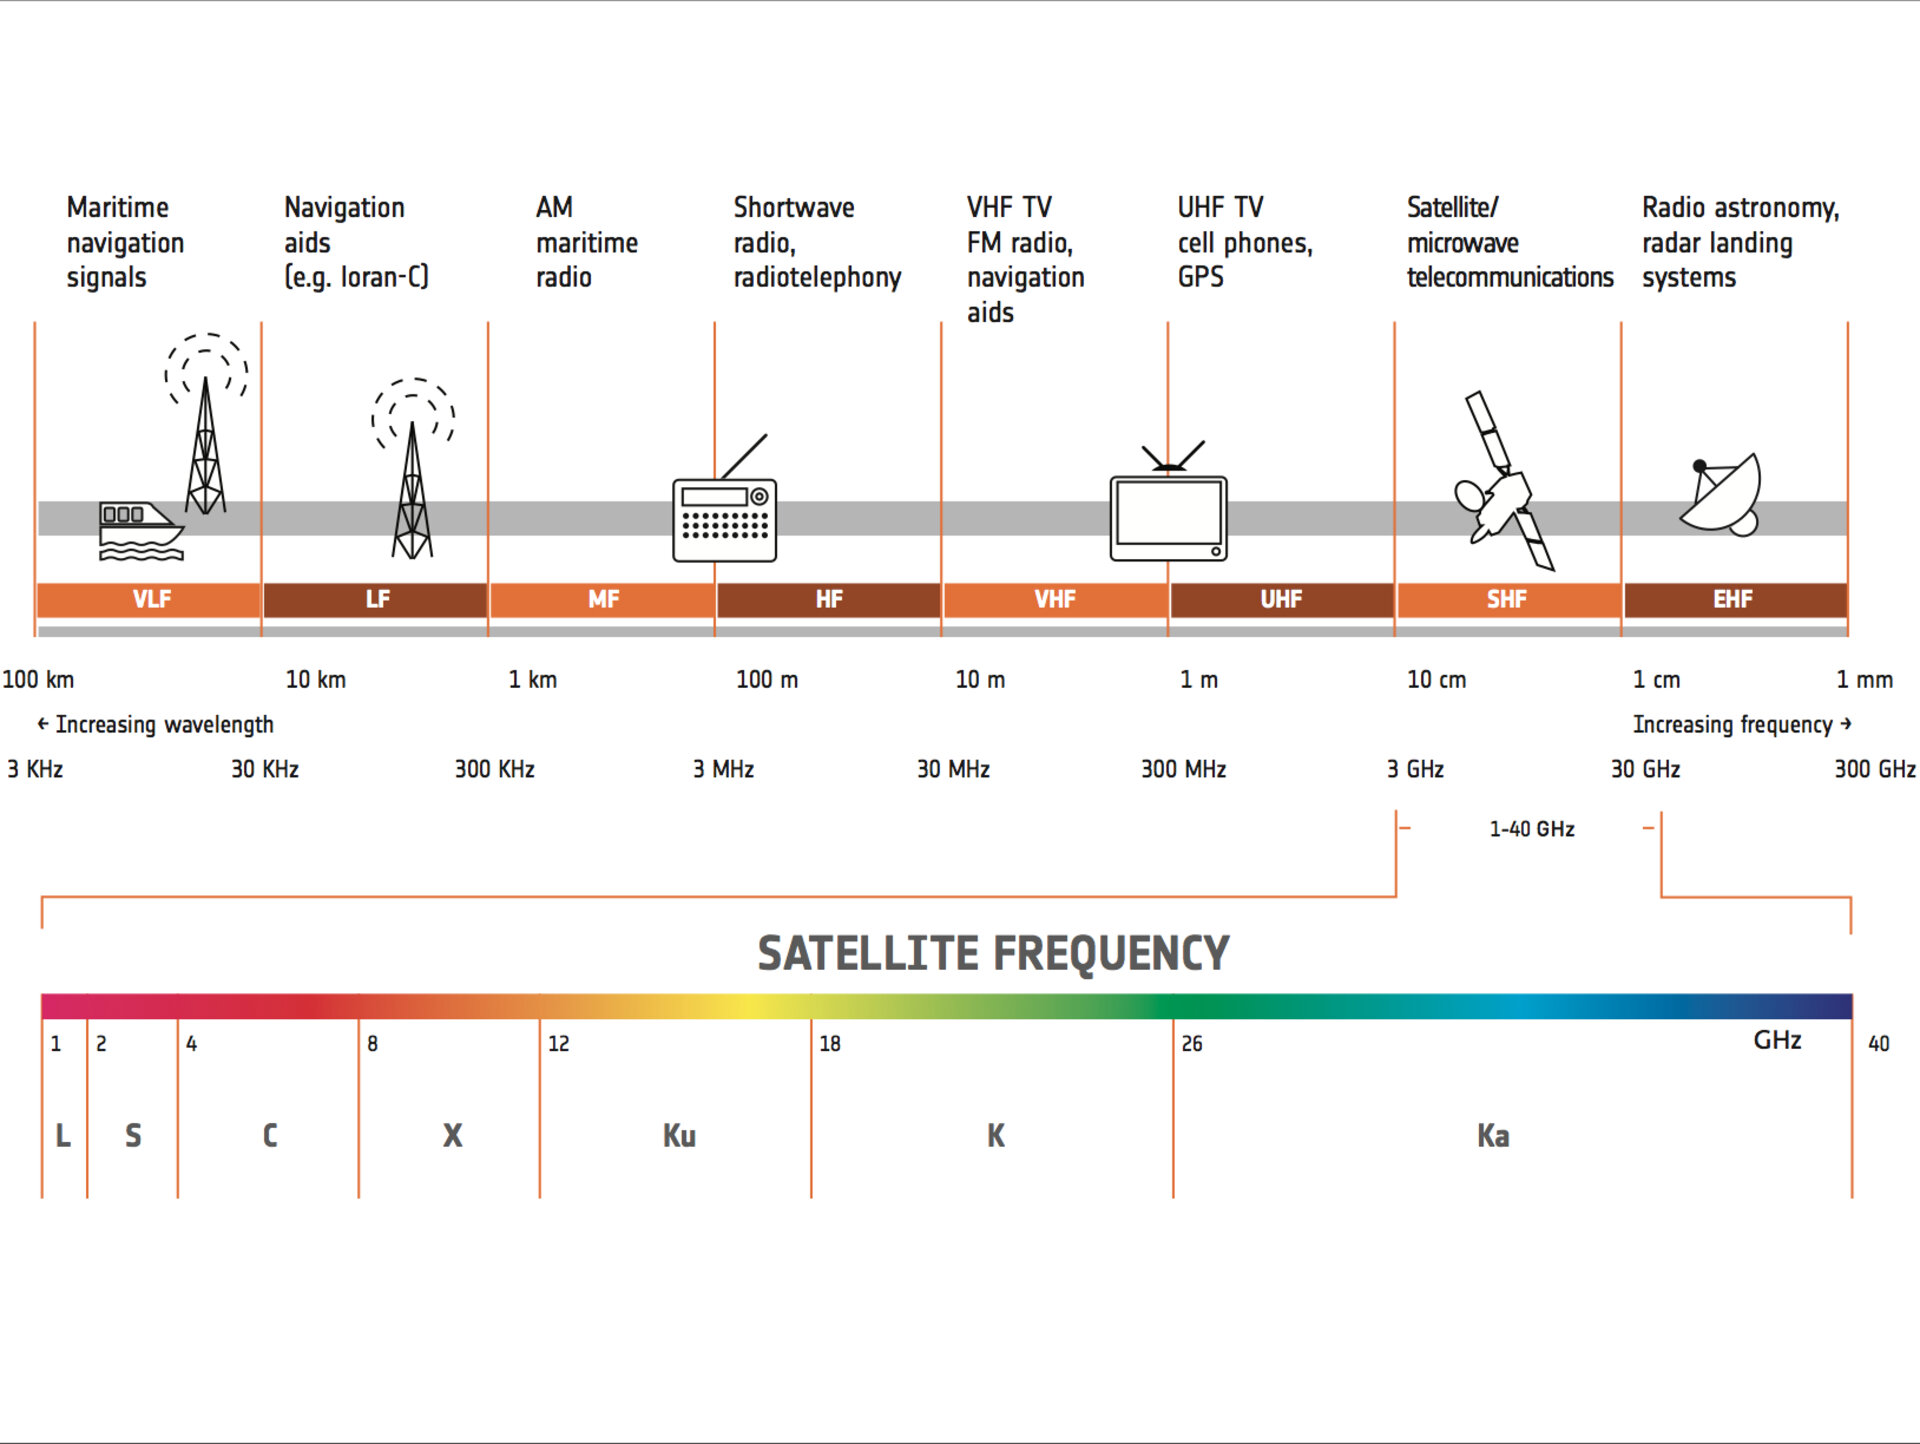 Satellite frequency bands